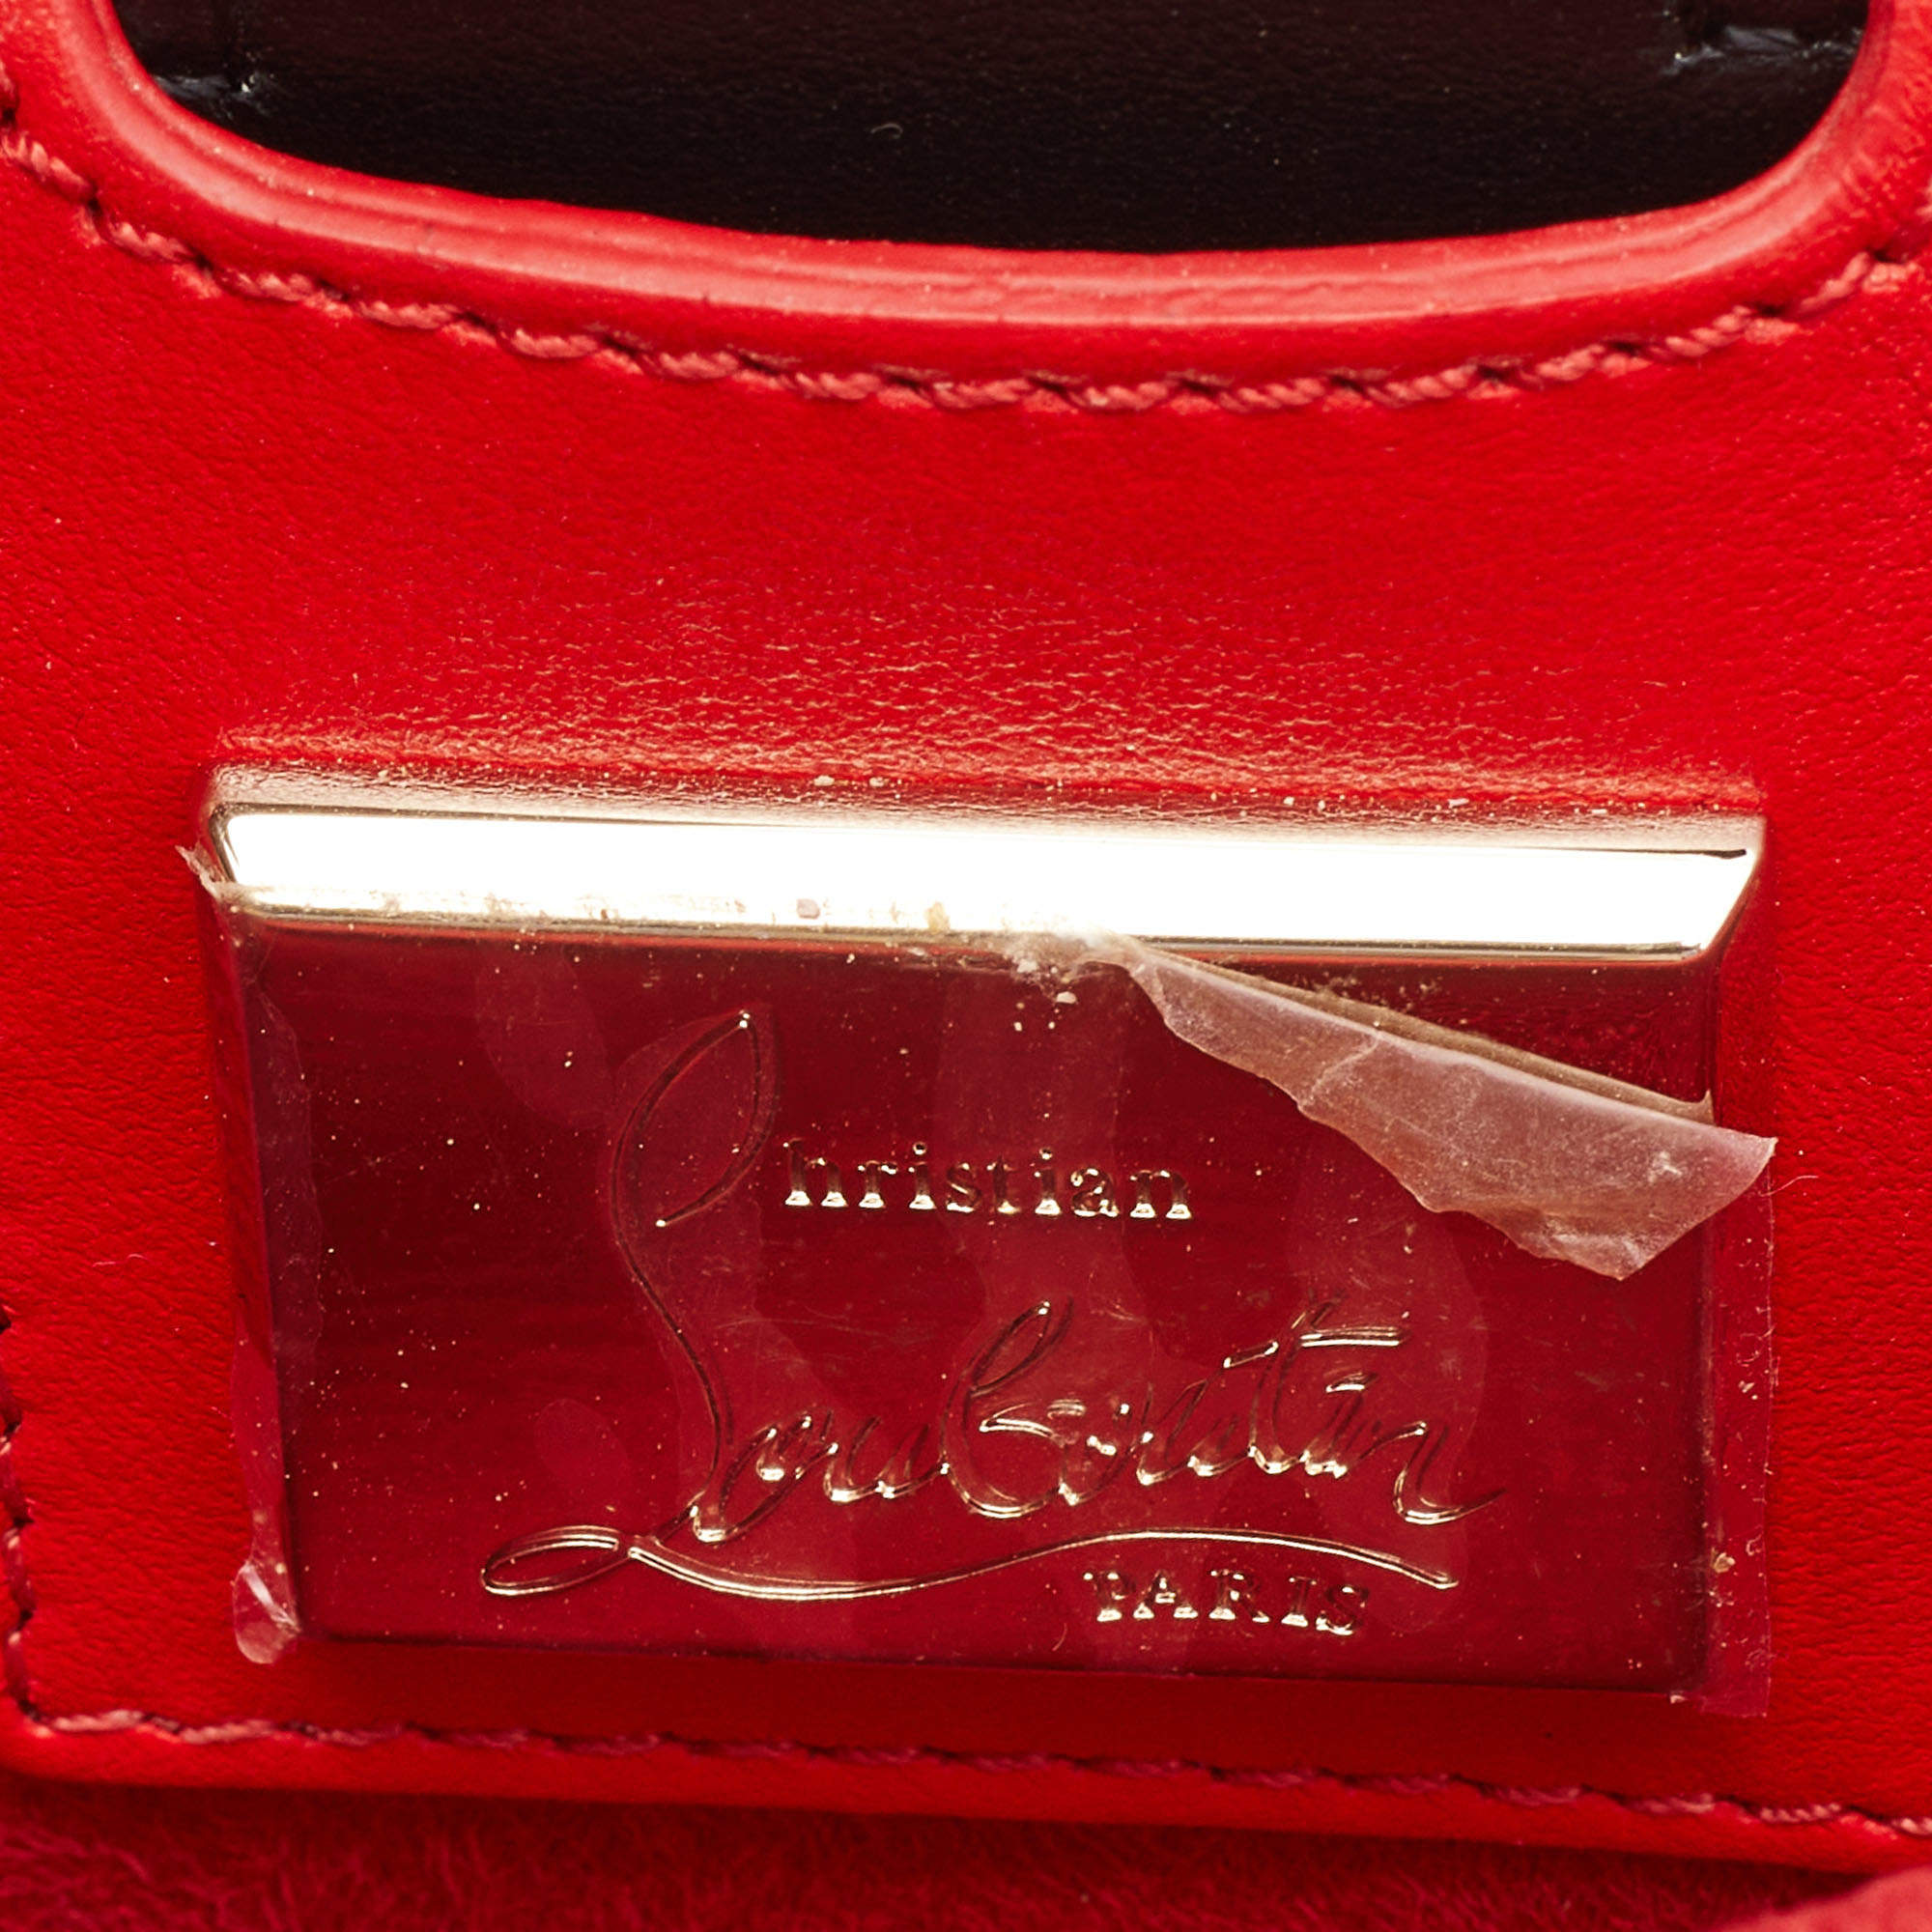 Leather tote Christian Louboutin Red in Leather - 29150786